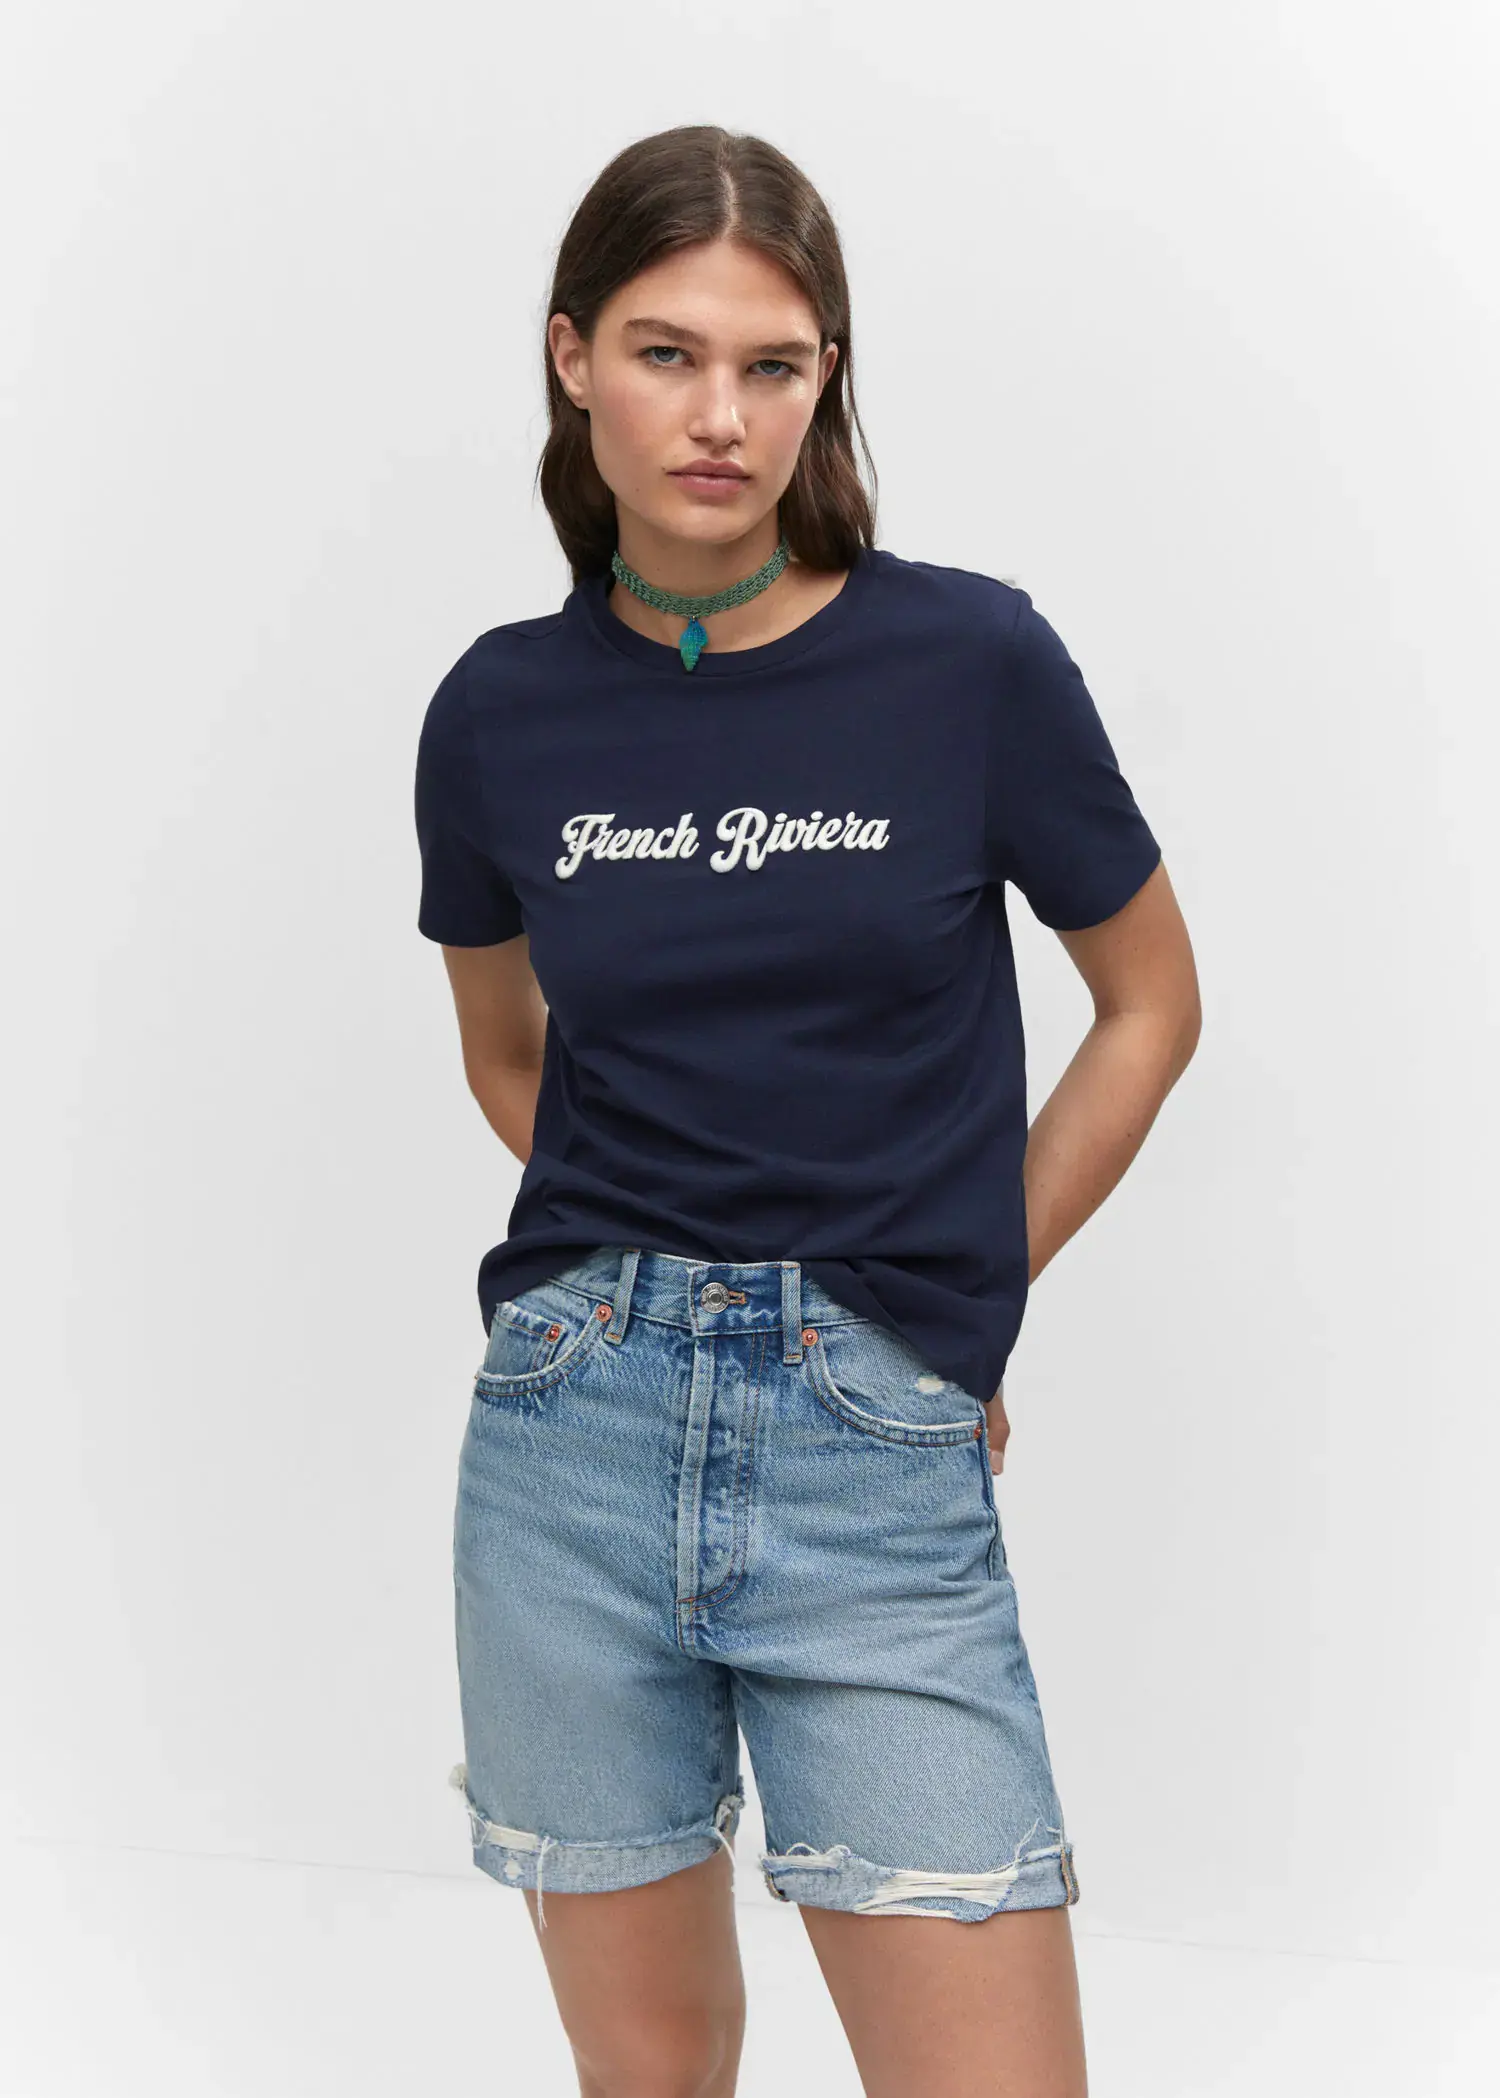 Mango Embroidered message T-shirt. a woman wearing a t-shirt with french riviera written on it 